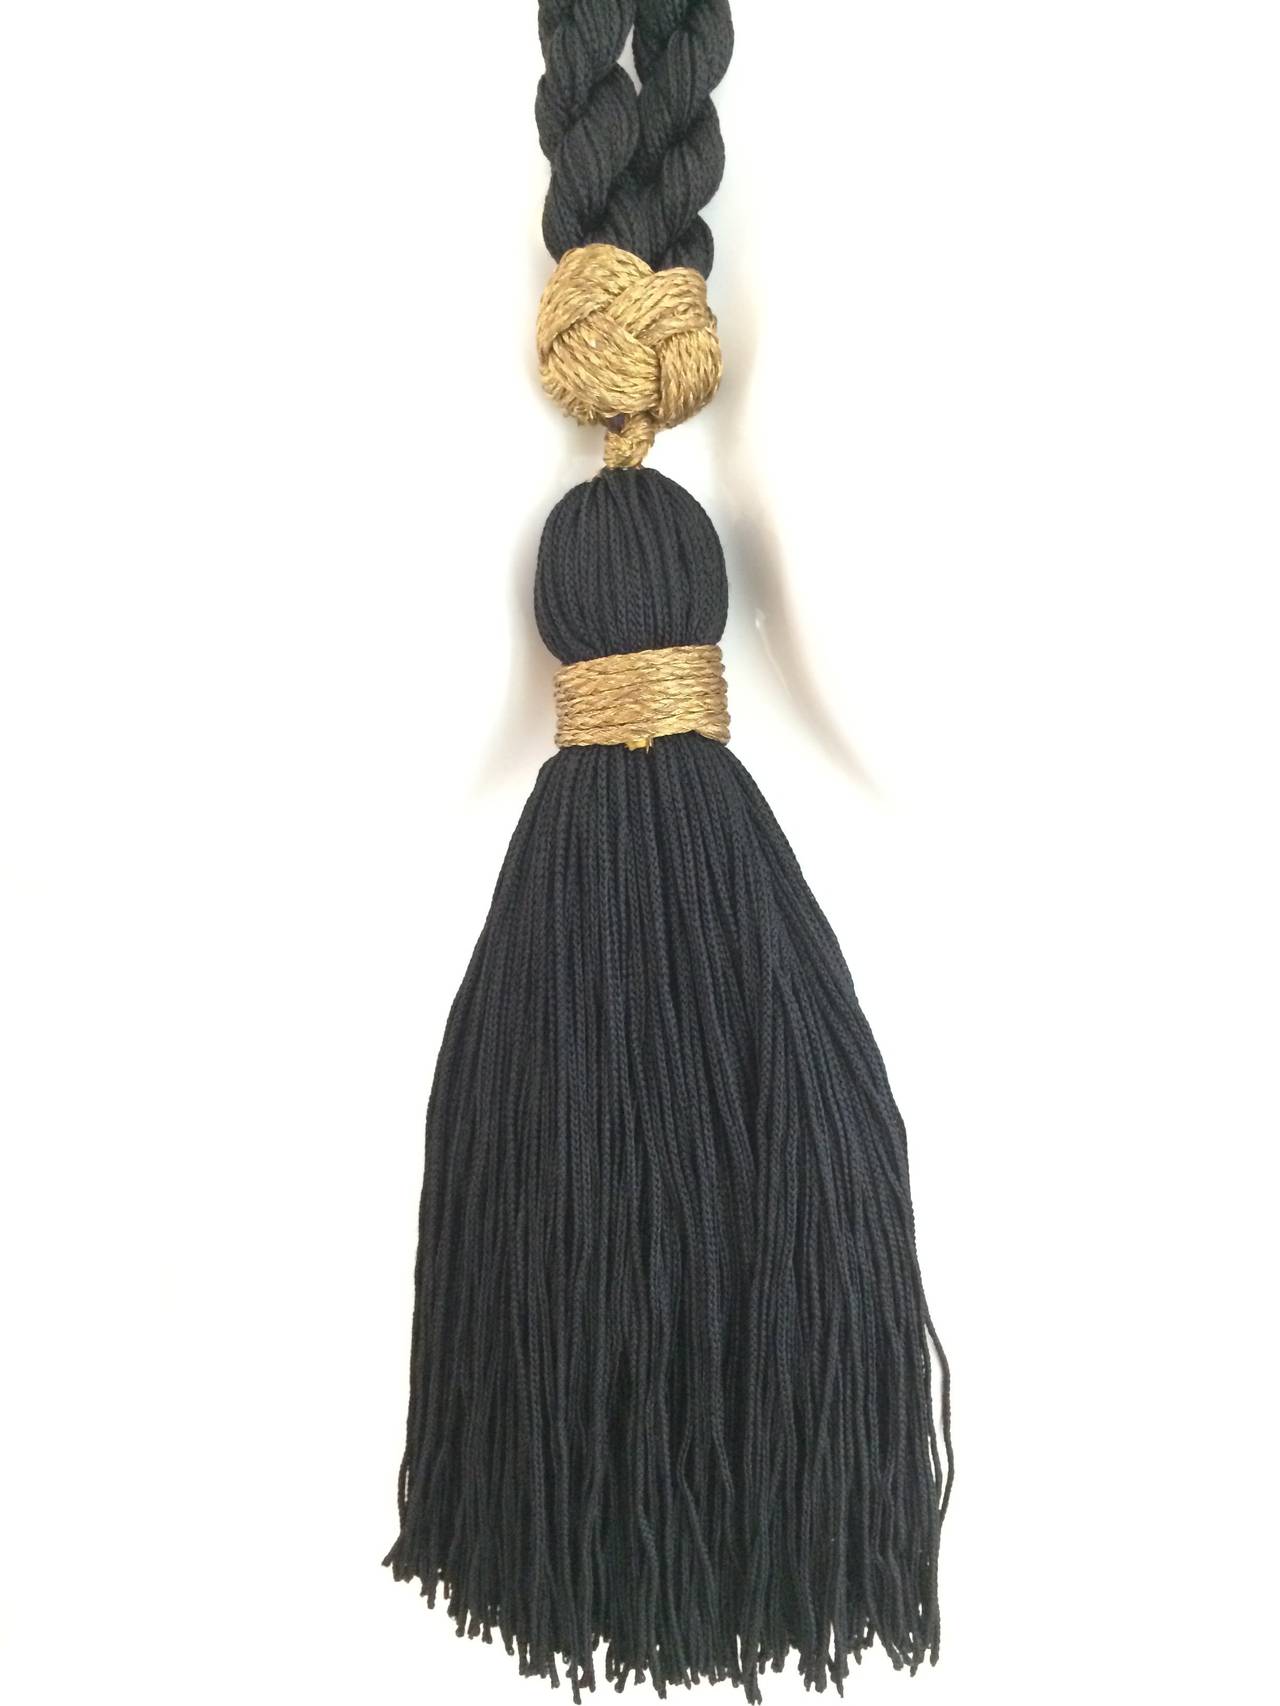 Yves Saint Laurent Black and Gold Rope Tassel Trim  Necklace  and Belt YSL 1